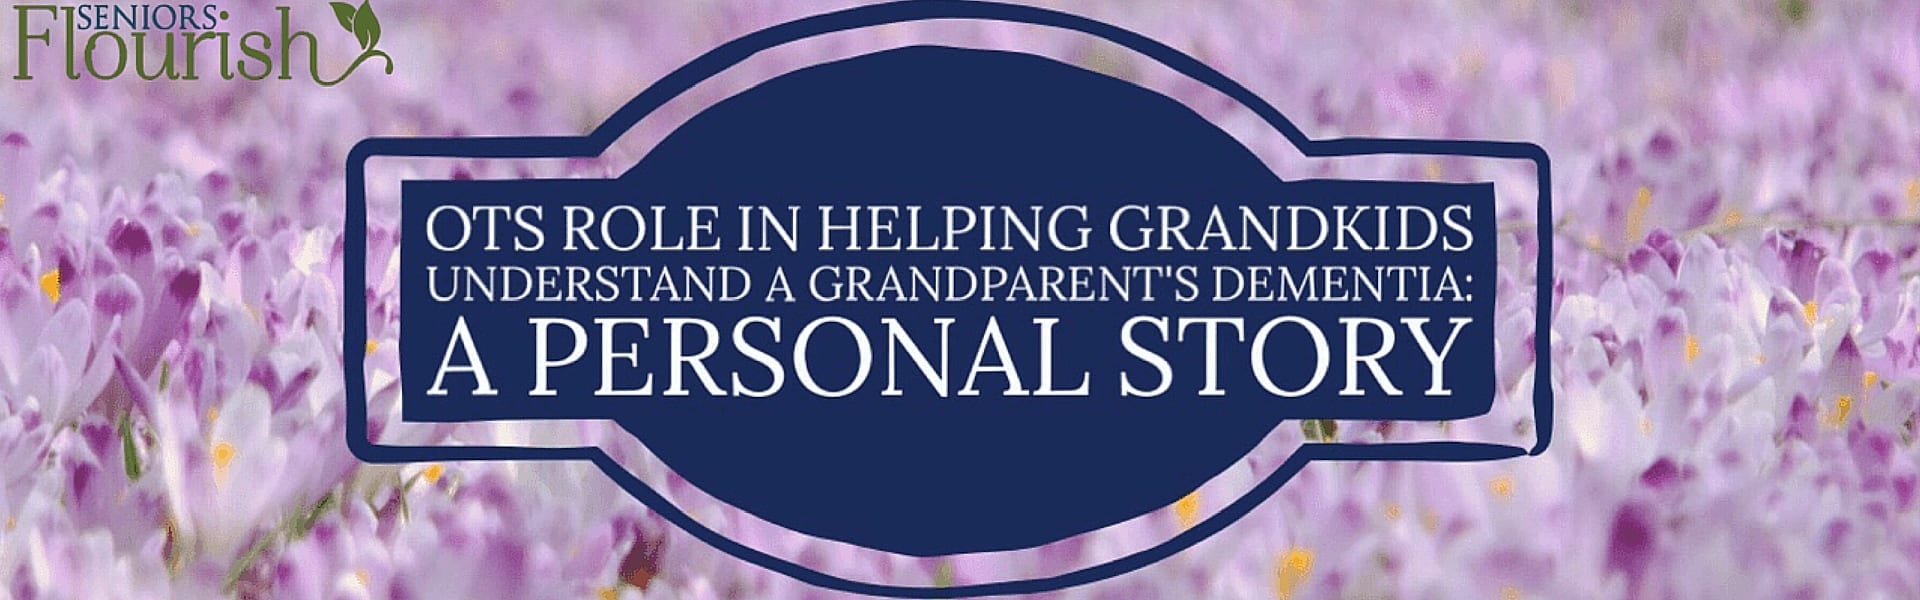 Plus FREE Patient Handout: Answering Kids Questions About Dementia. Read about a personal story of a woman, her mother, raising kids and how writing a book helped her on her journey. | SeniorsFlourish.com #geriatricOT